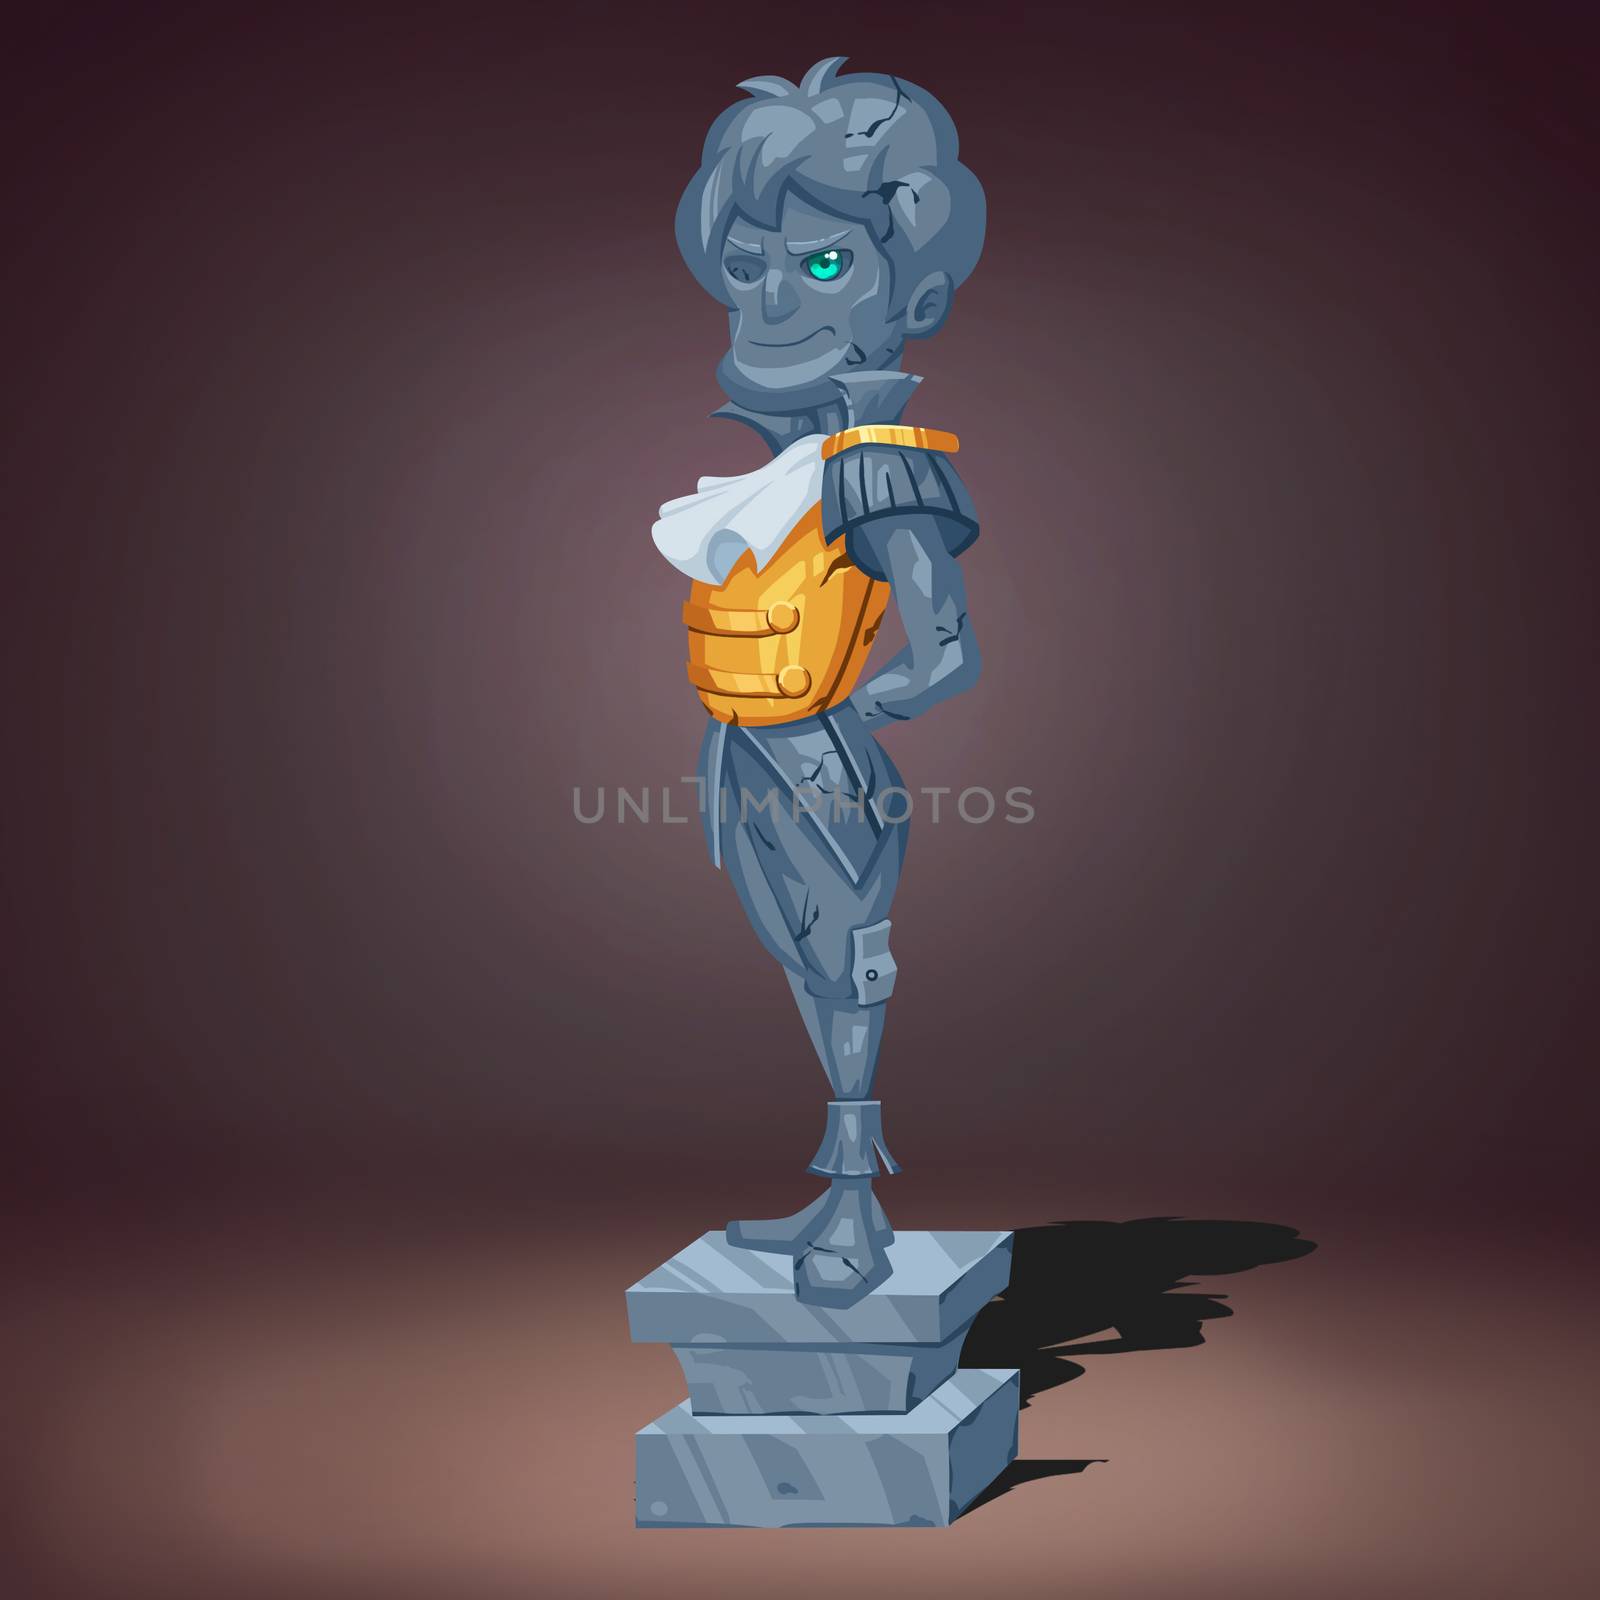 Illustration: The Handsome Statue. Element Creation / Character Design in a Fantastic Imaginary World Called "The king and the bird". Realistic / Cartoon / Fantastic Style